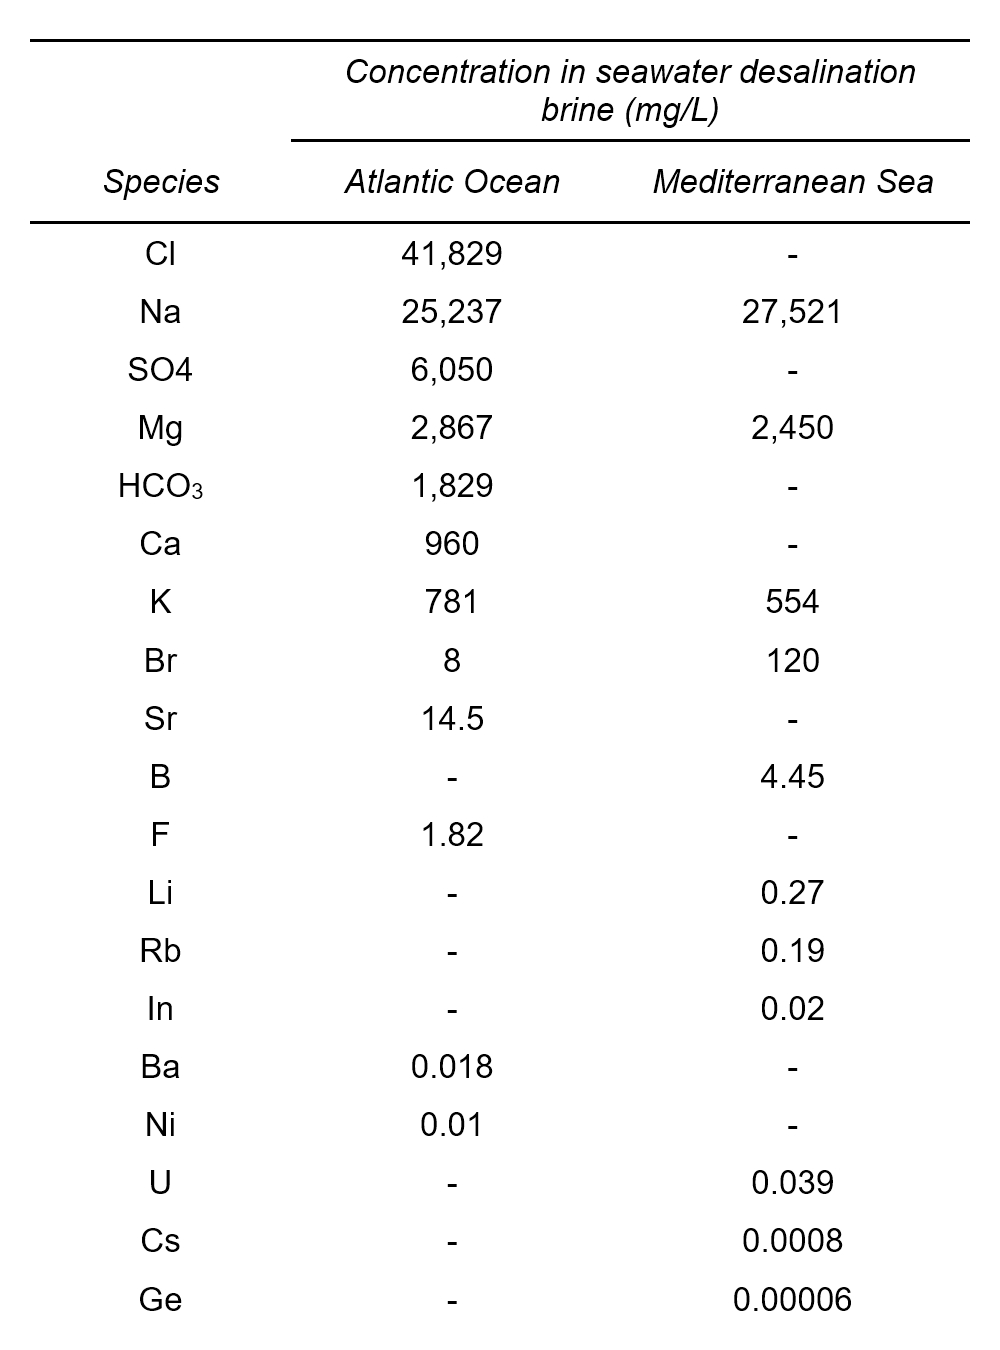 Average values of elements present in seawater reverse osmosis concentrates